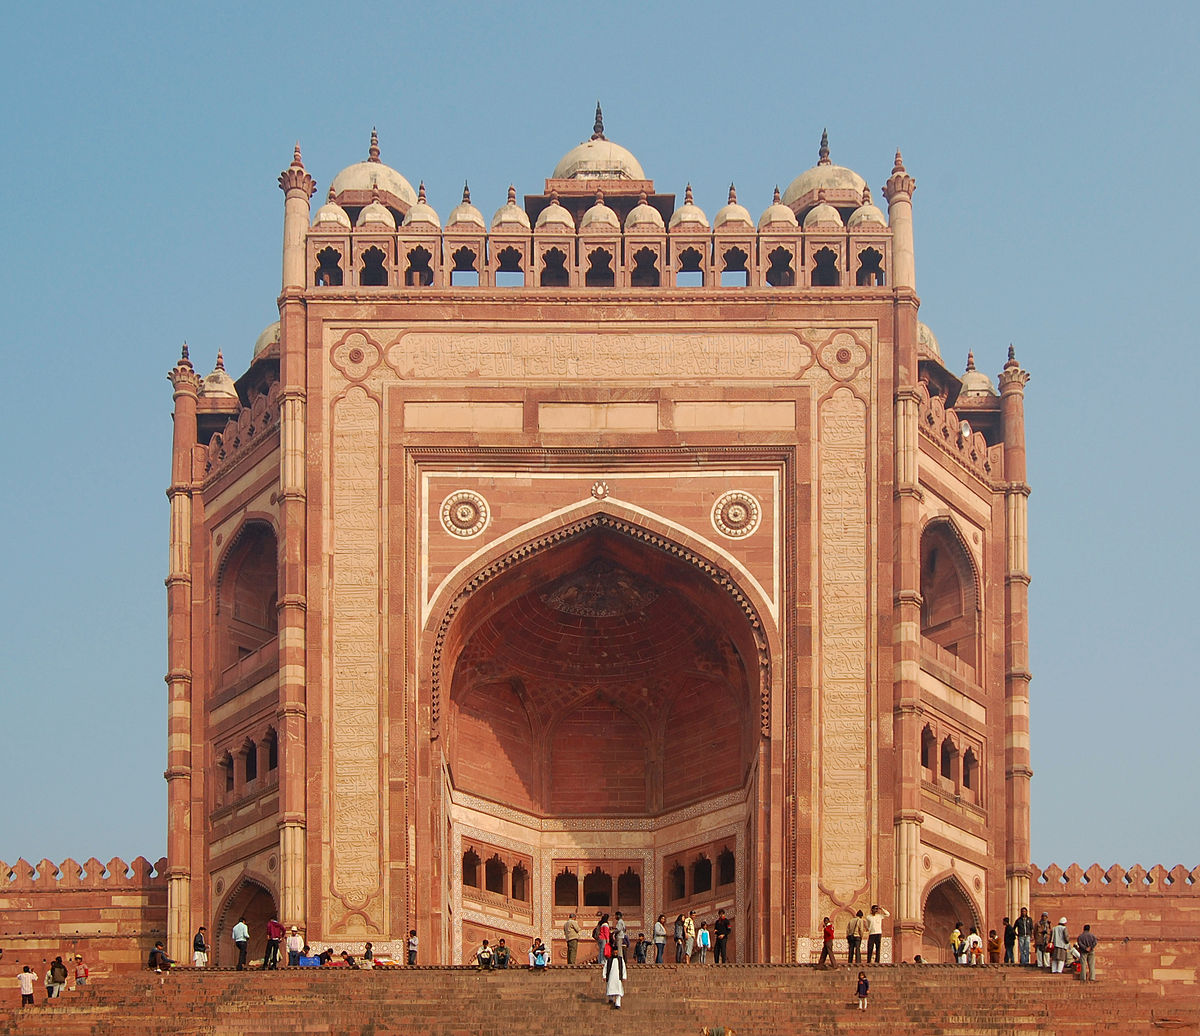 Buland Darwaza is a mammoth monument of India built by Mughal Emperor Akbar for his victory over Gujarat.